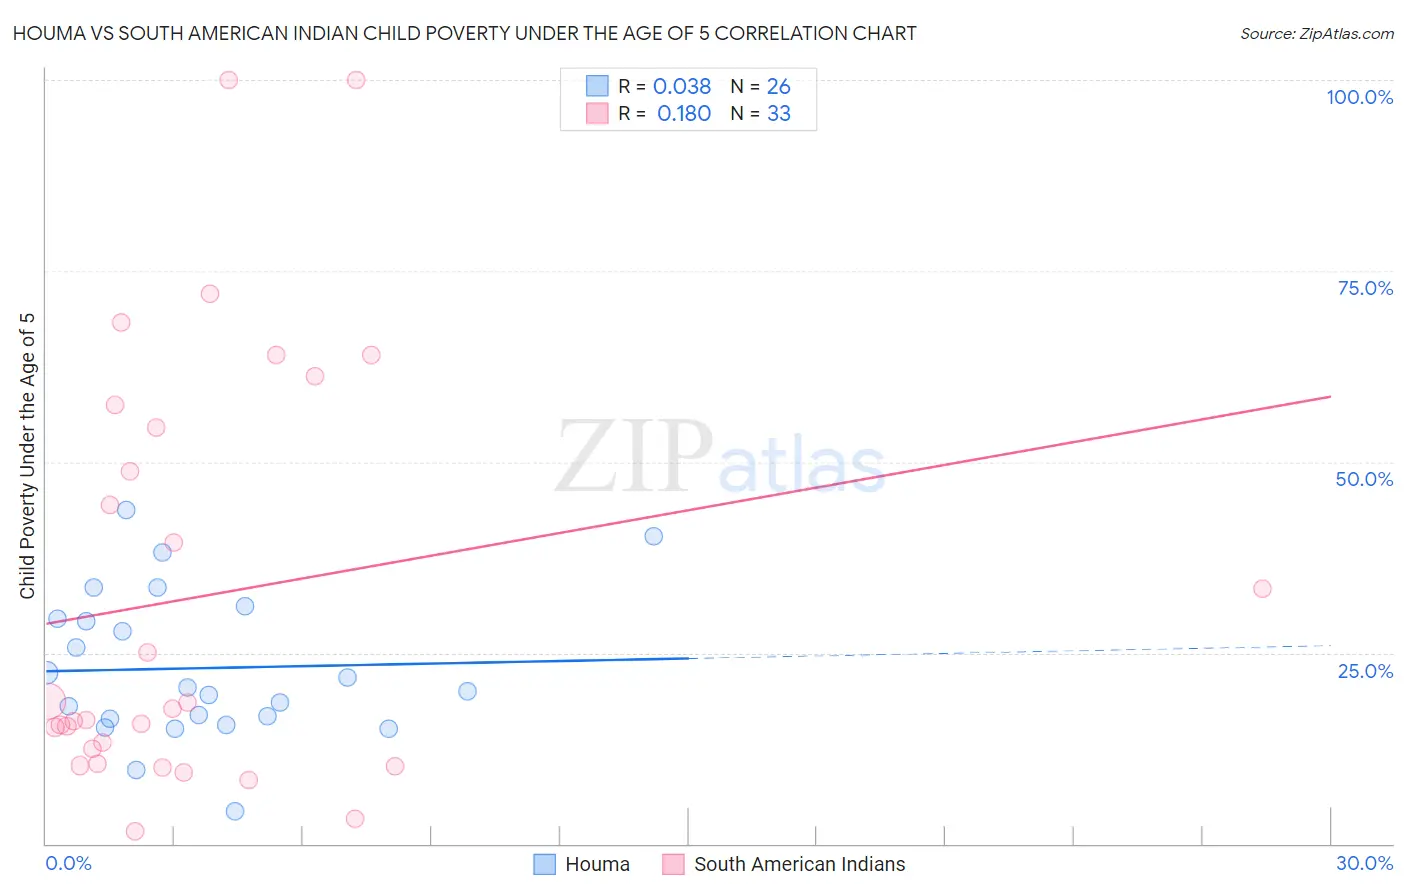 Houma vs South American Indian Child Poverty Under the Age of 5